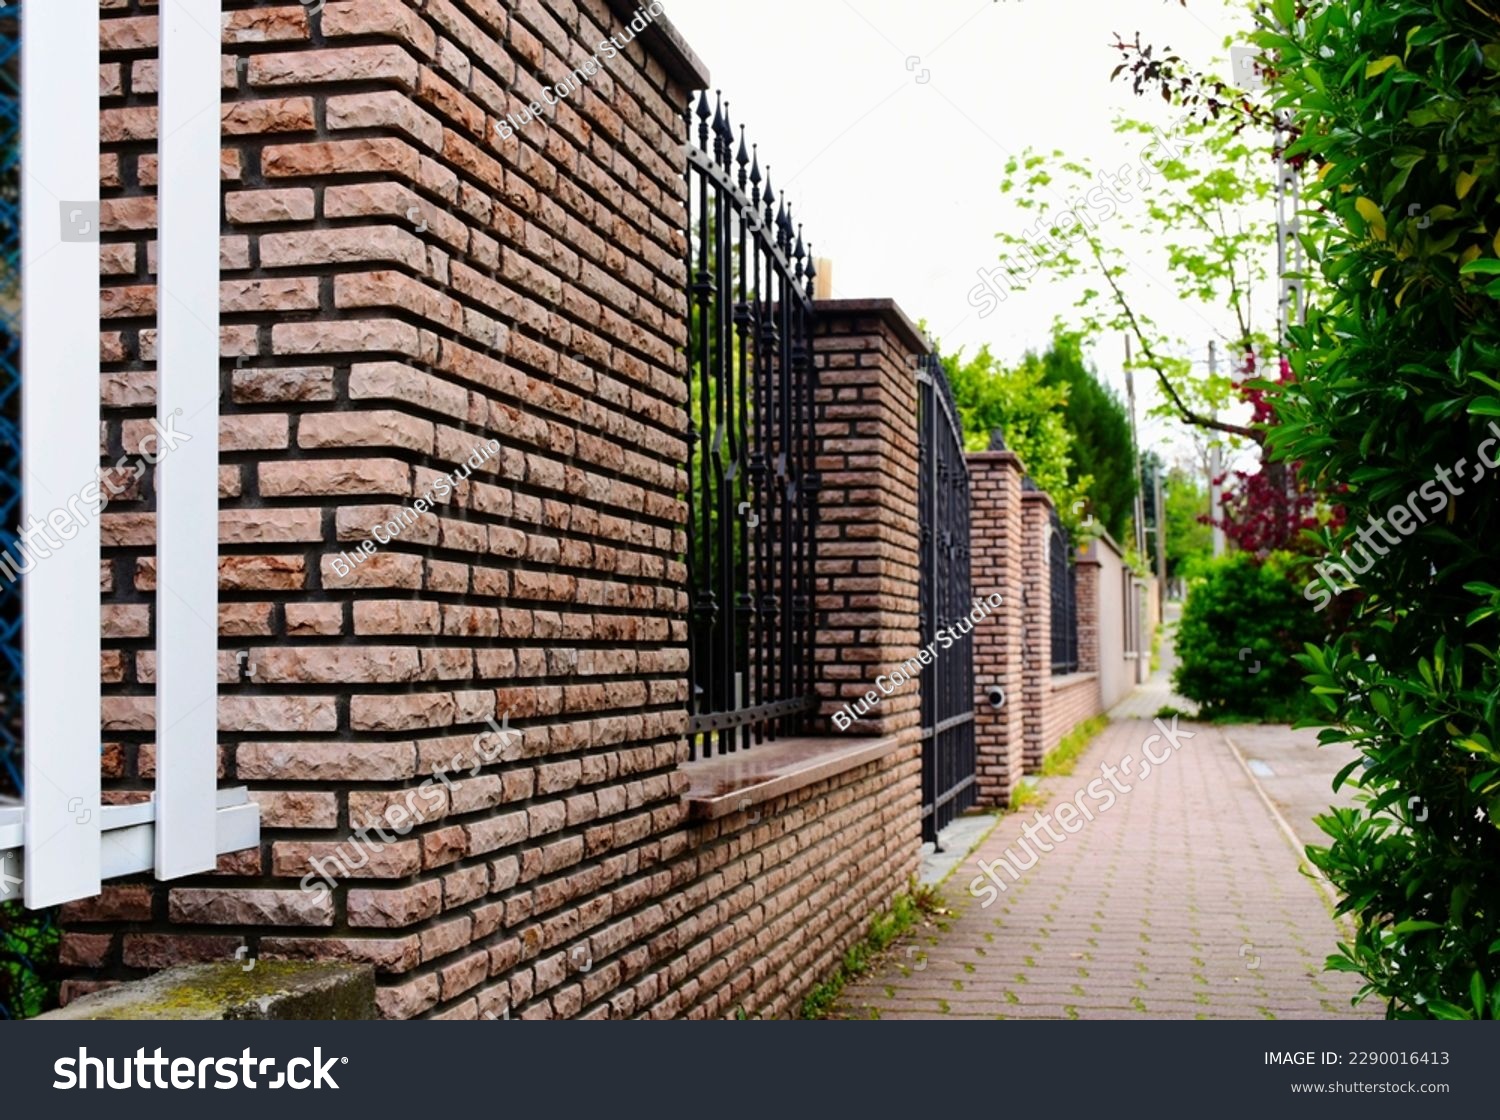 decorative wrought iron picket fence panels and stone fence piers. green garden, lush trees, plants and foliage. home ownership concept. property protection. concrete pavement. diminishing perspective #2290016413